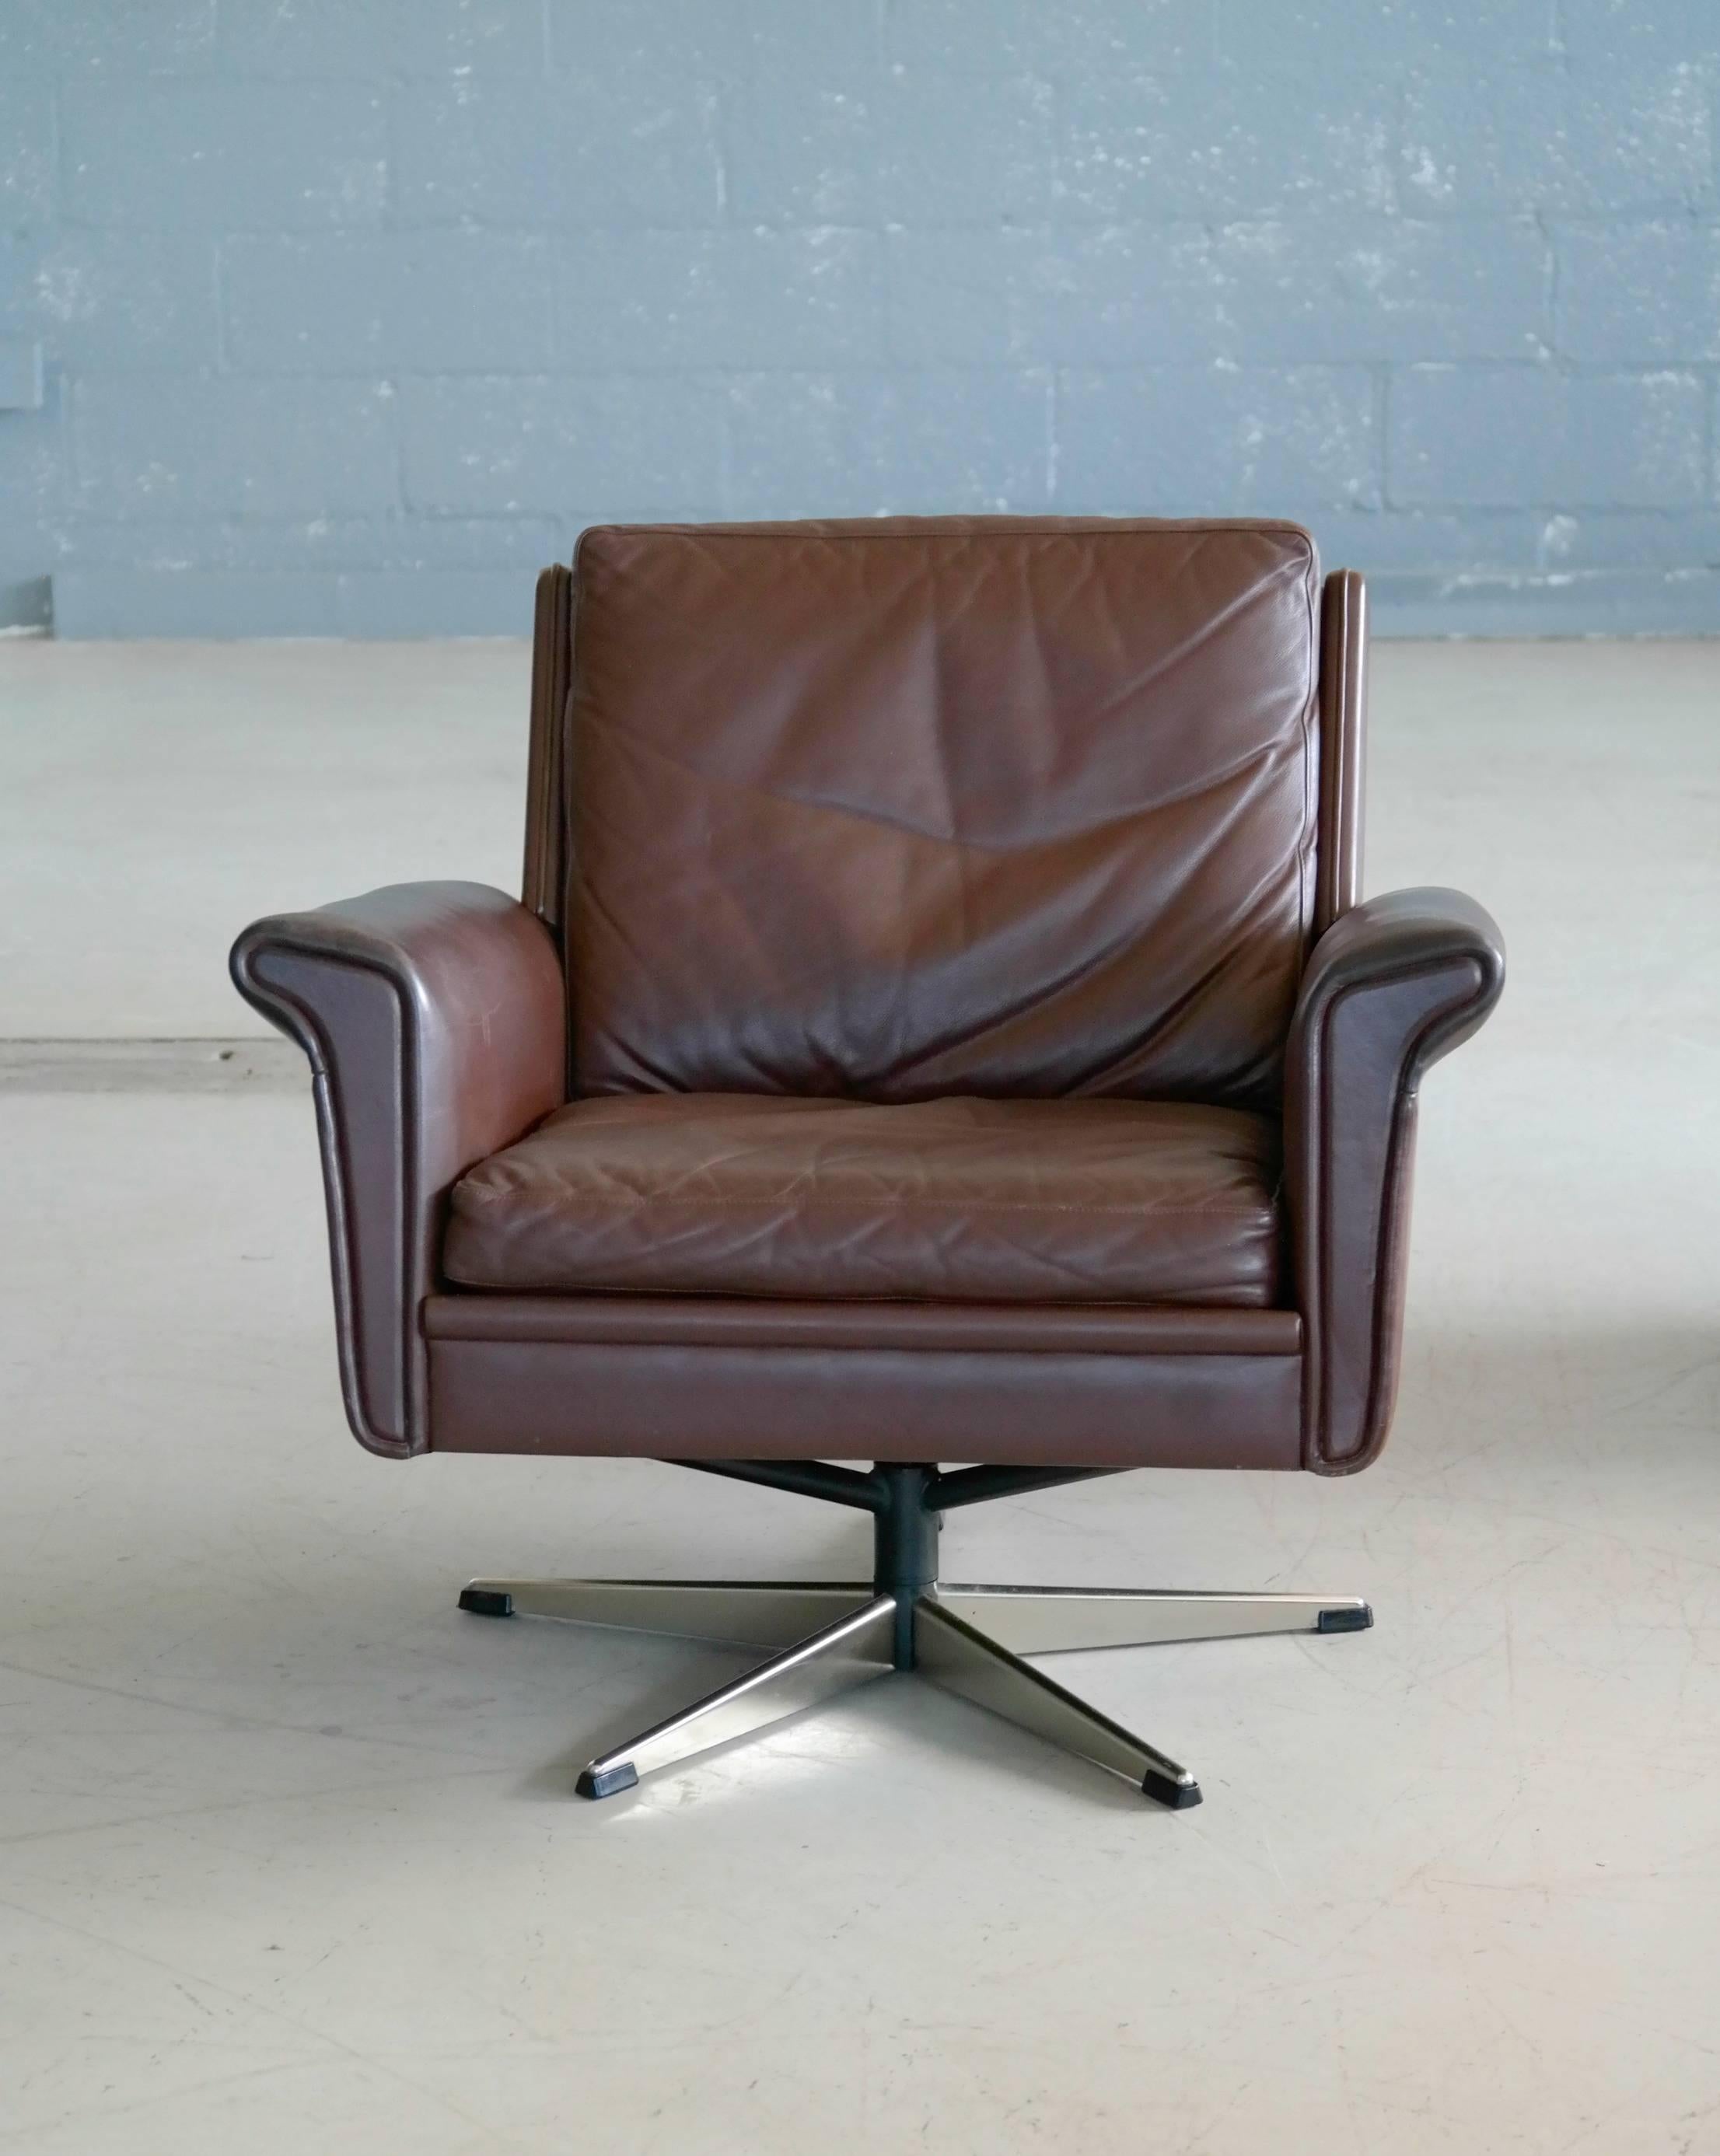 Fabulous modern and luxurious swivel chair in supple brown chocolate colored leather on a chrome-plated aluminium swivel base. Beautiful example of Danish modern at its best designed by Georg Thams, circa 1969 and produced sometimes in the early